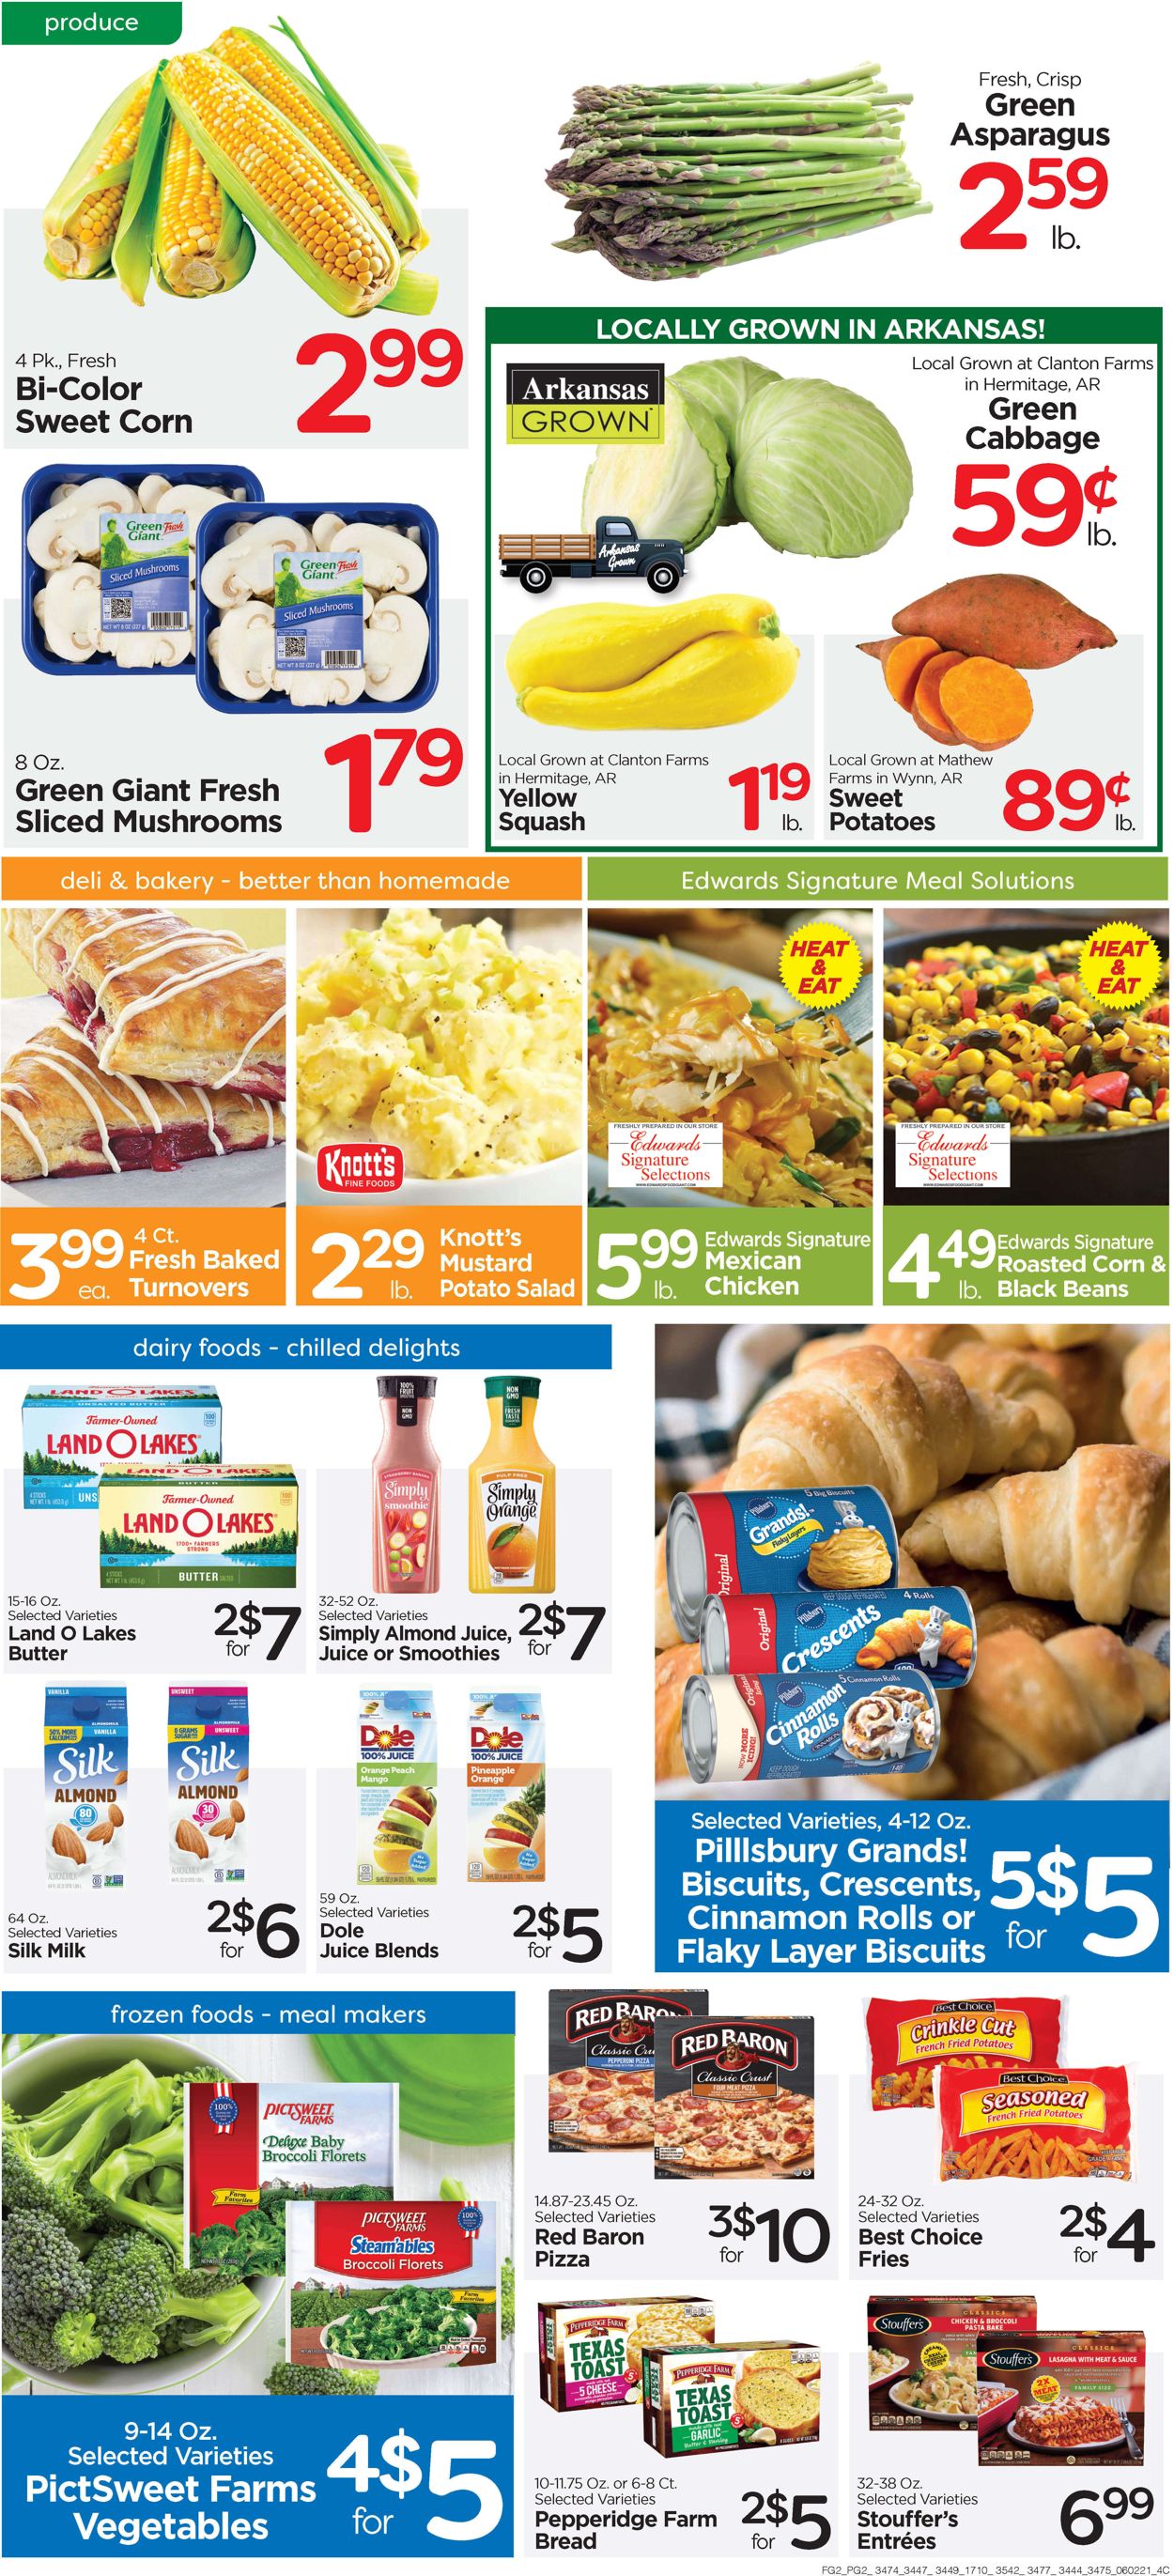 Edwards Food Giant Ad from 06/02/2021